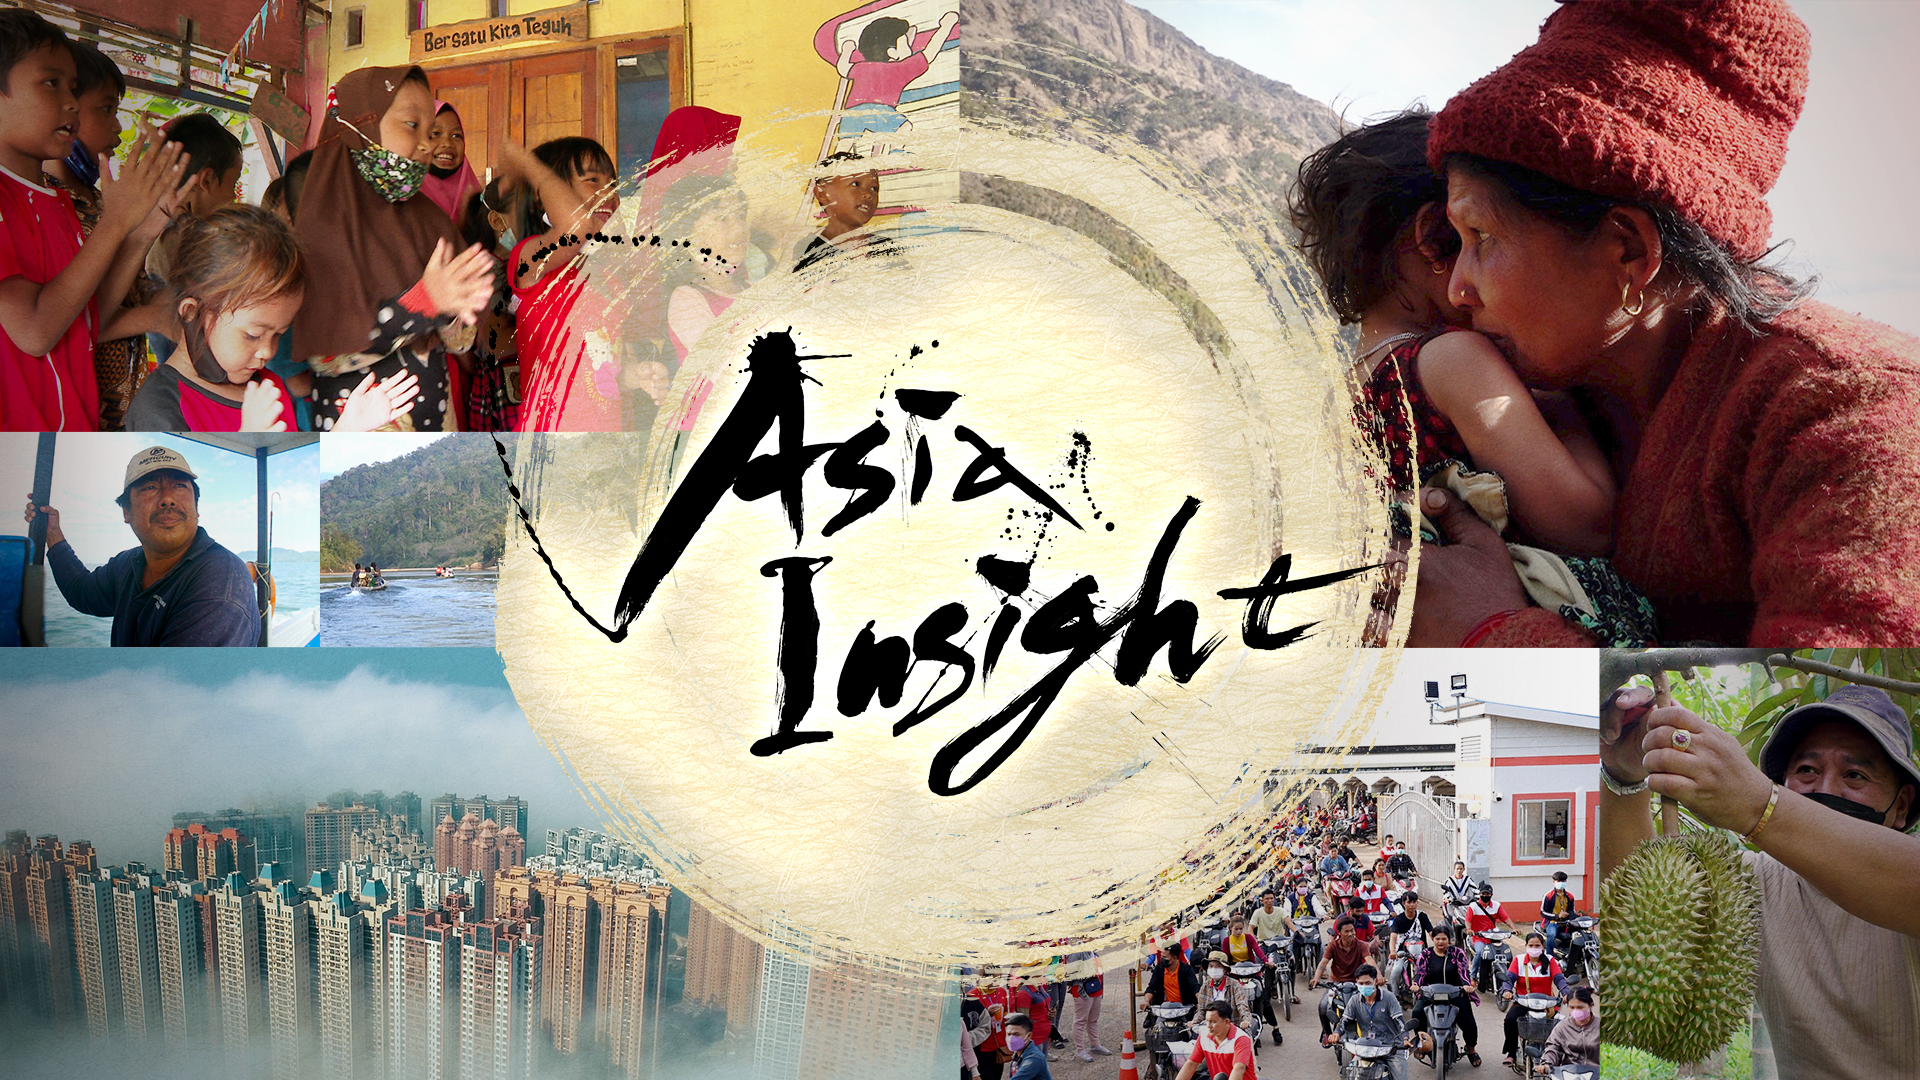 Check out Asia Insight Season 11 on your local station!